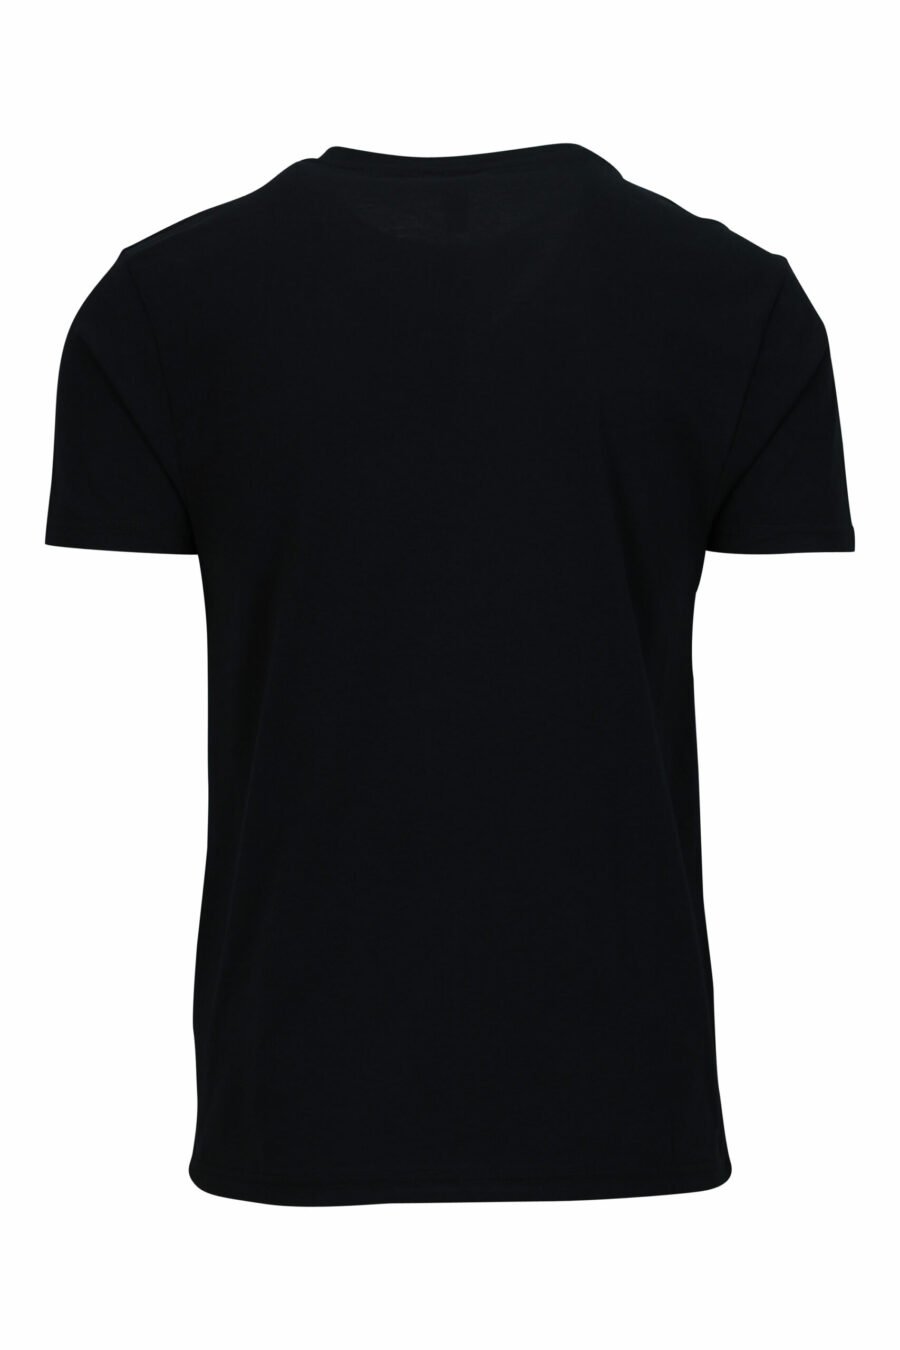 Black T-shirt with white logo with red ribbon detail on shoulders - 667113604275 1 scaled